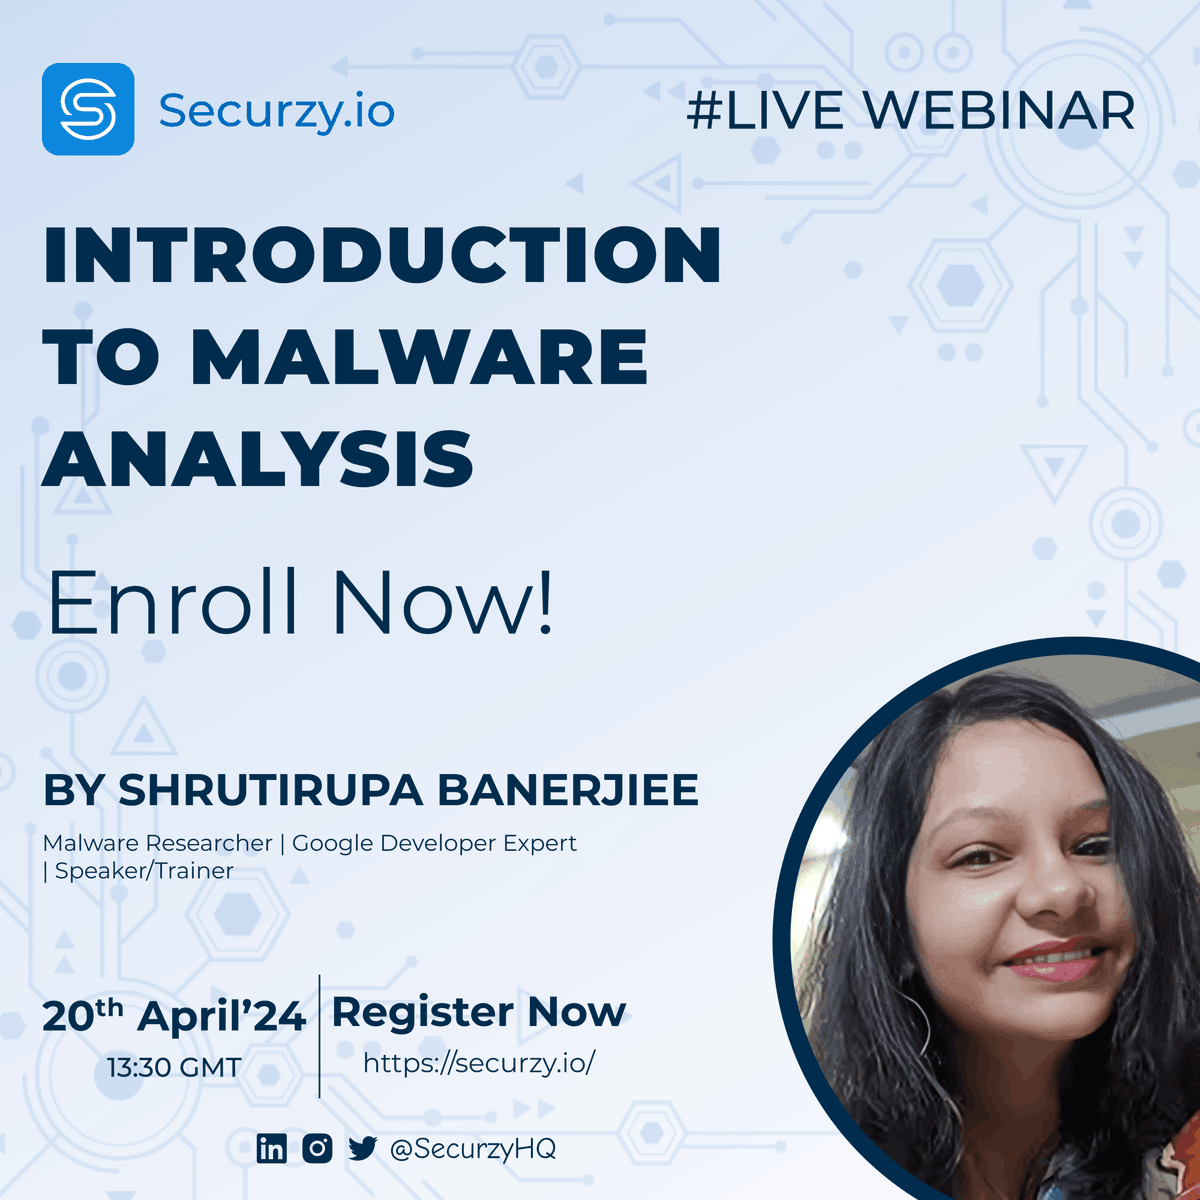 🔍Dive into the world of Malware Analysis with us! Join our FREE webinar on 'Introduction to Malware Analysis' by Shrutirupa Banerjiee. Learn essential skills to combat cyber threats. Only 7 days left! Register now: learn.securzy.io/webinar/introd… #MalwareAnalysis #CyberSecurity #Securzy